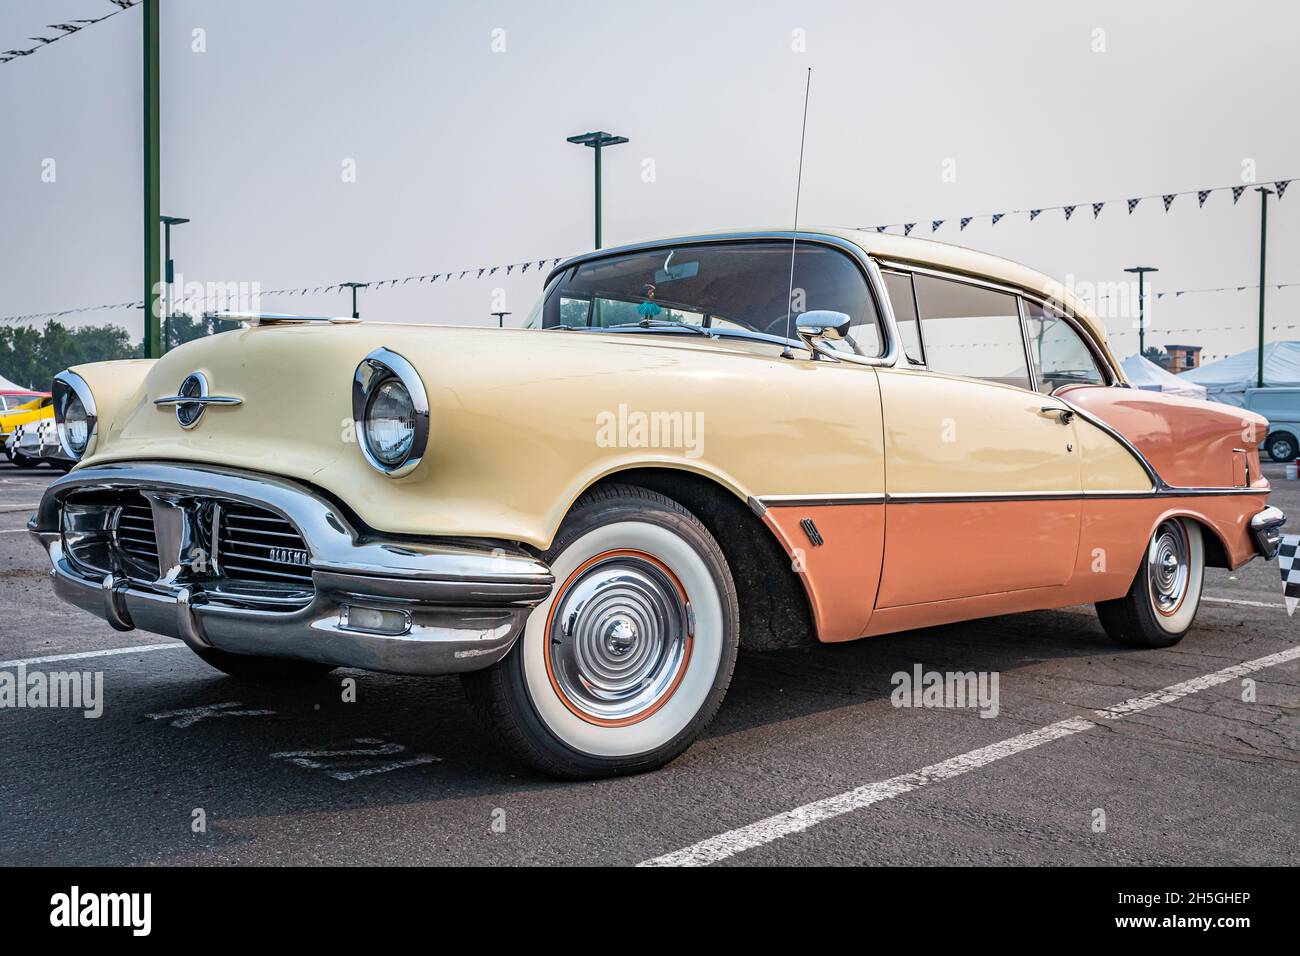 Reno, NV - August 6, 2021: 1956 Oldsmobile 88 Hardtop Coupe at a local car show. Stock Photo